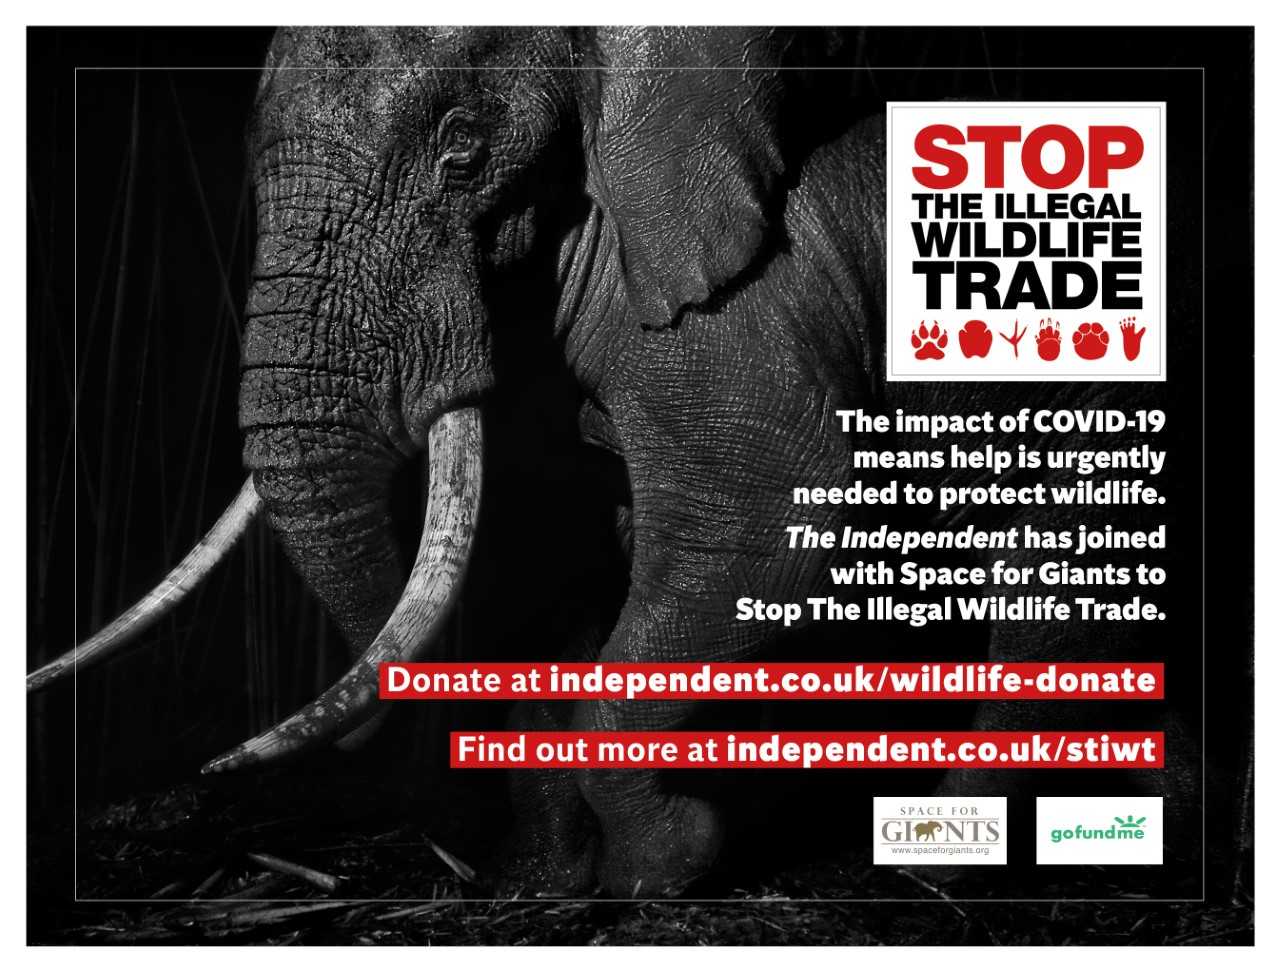 The Covid-19 conservation crisis has shown the urgency of The Independent’蝉 Stop the Illegal Wildlife Trade campaign, which seeks an international effort to clamp down on illegal trade of wild animals